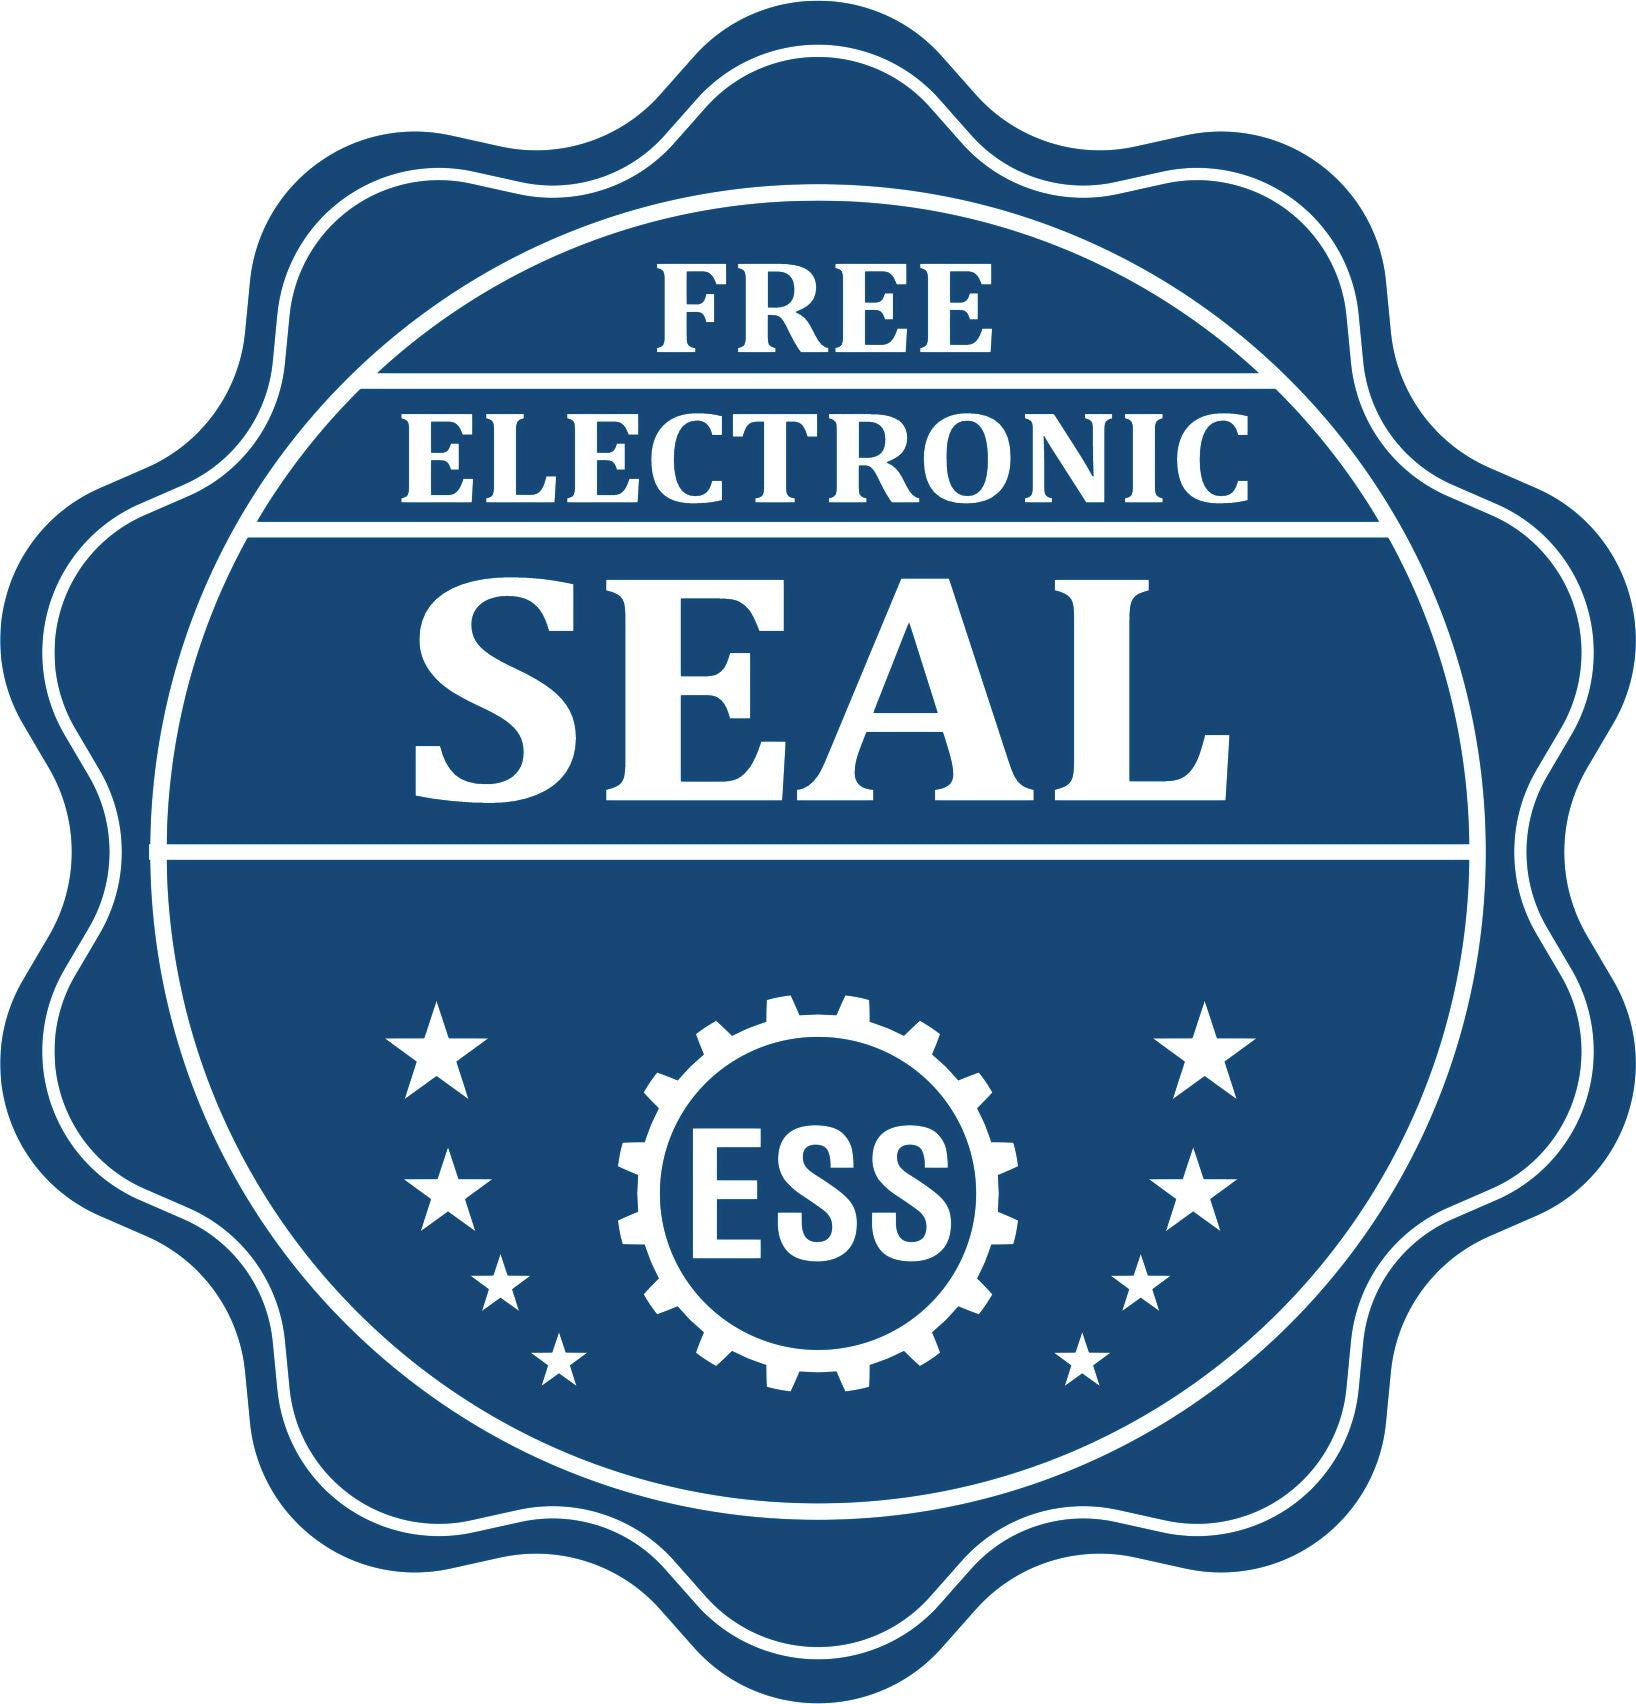 A badge showing a free electronic seal for the Premium MaxLight Pre-Inked South Dakota Engineering Stamp with stars and the ESS gear on the emblem.